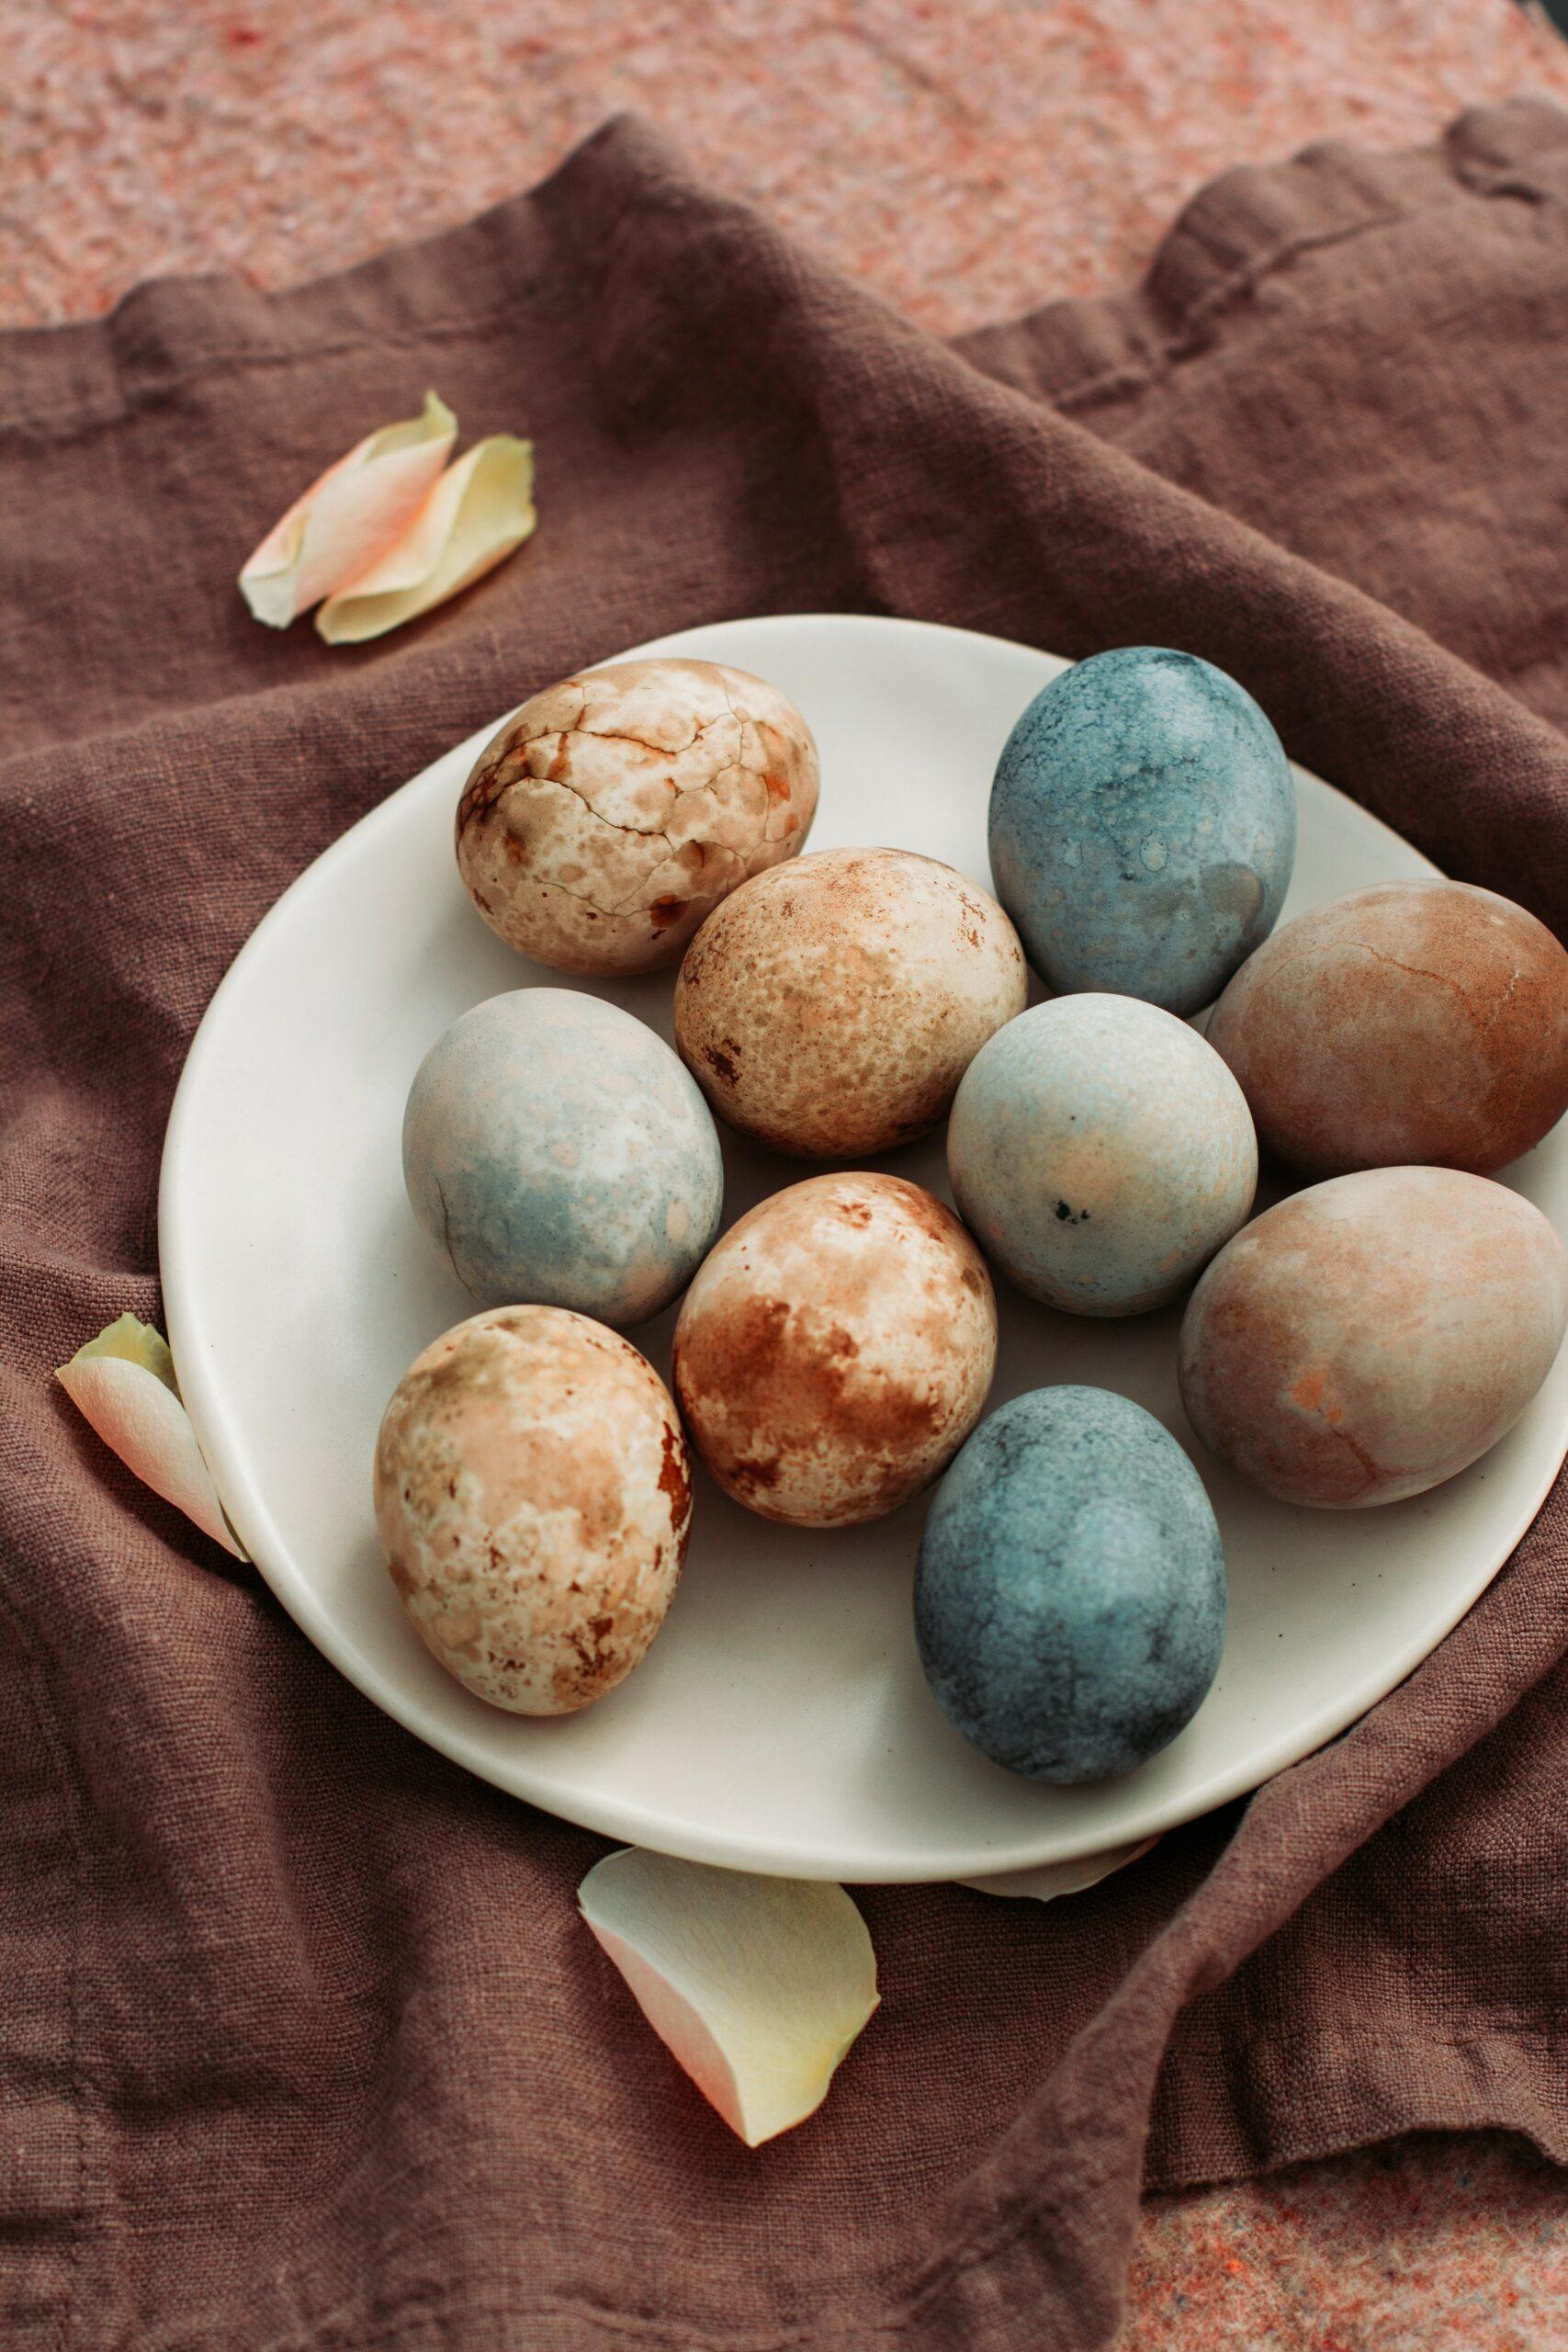 Easter eggs that have been dyed with faded colors. They have a splotchy look